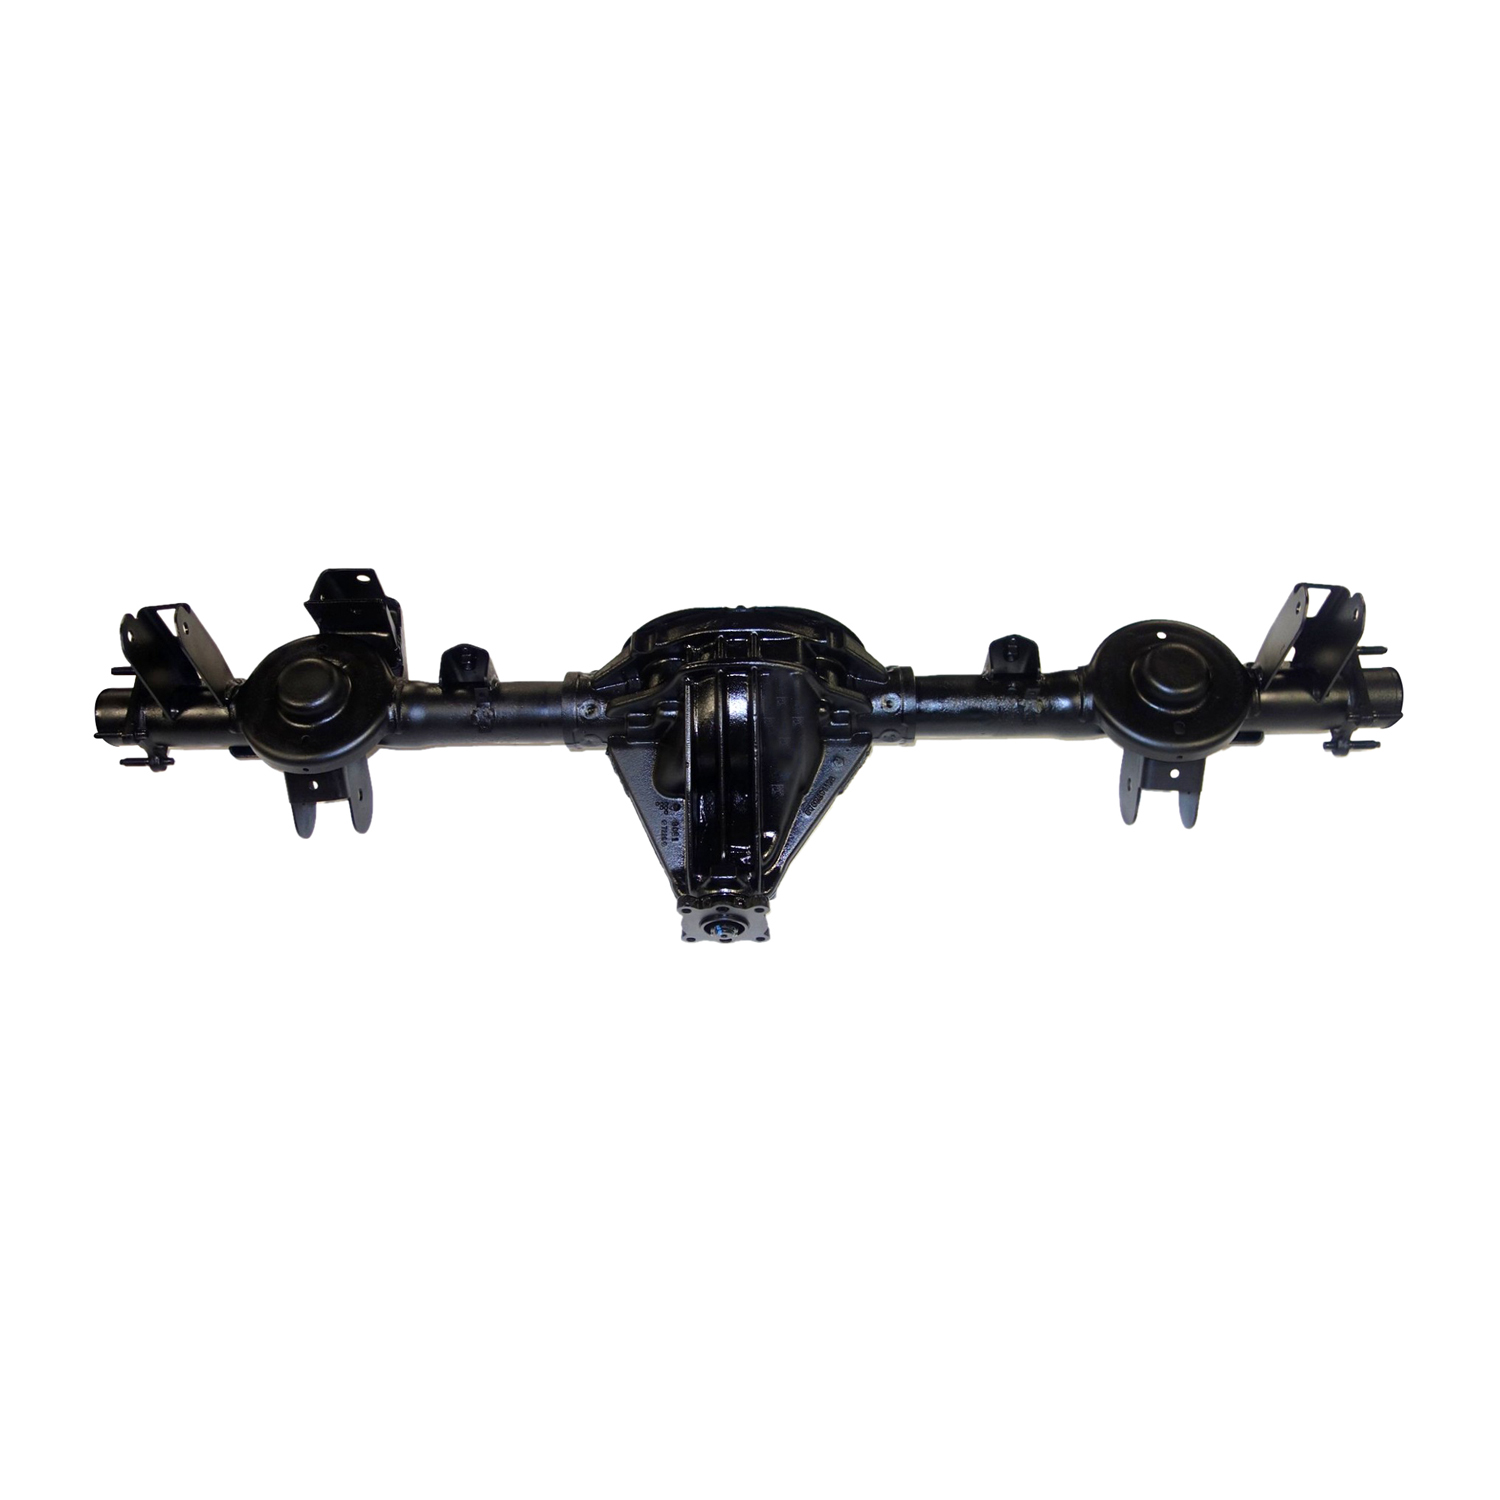 Remanufactured Axle Assy for Chy 8.25" 03-04 Liberty 4.11 w/ ABS, CV Driveshaft, Posi LSD